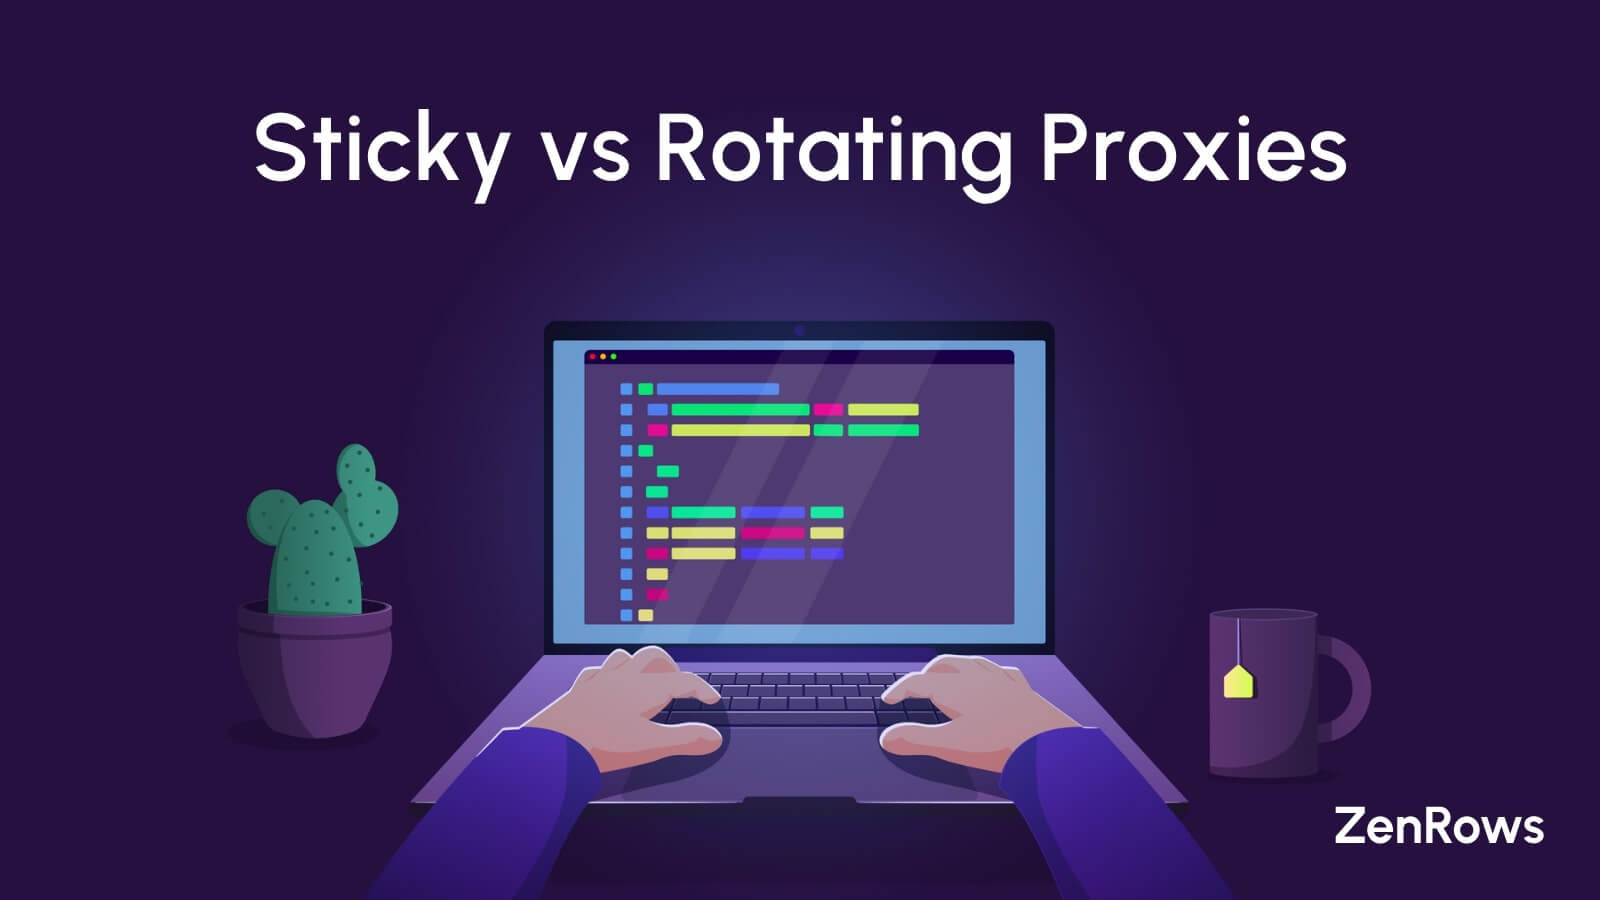 Sticky vs Rotating Proxies: which one to use?